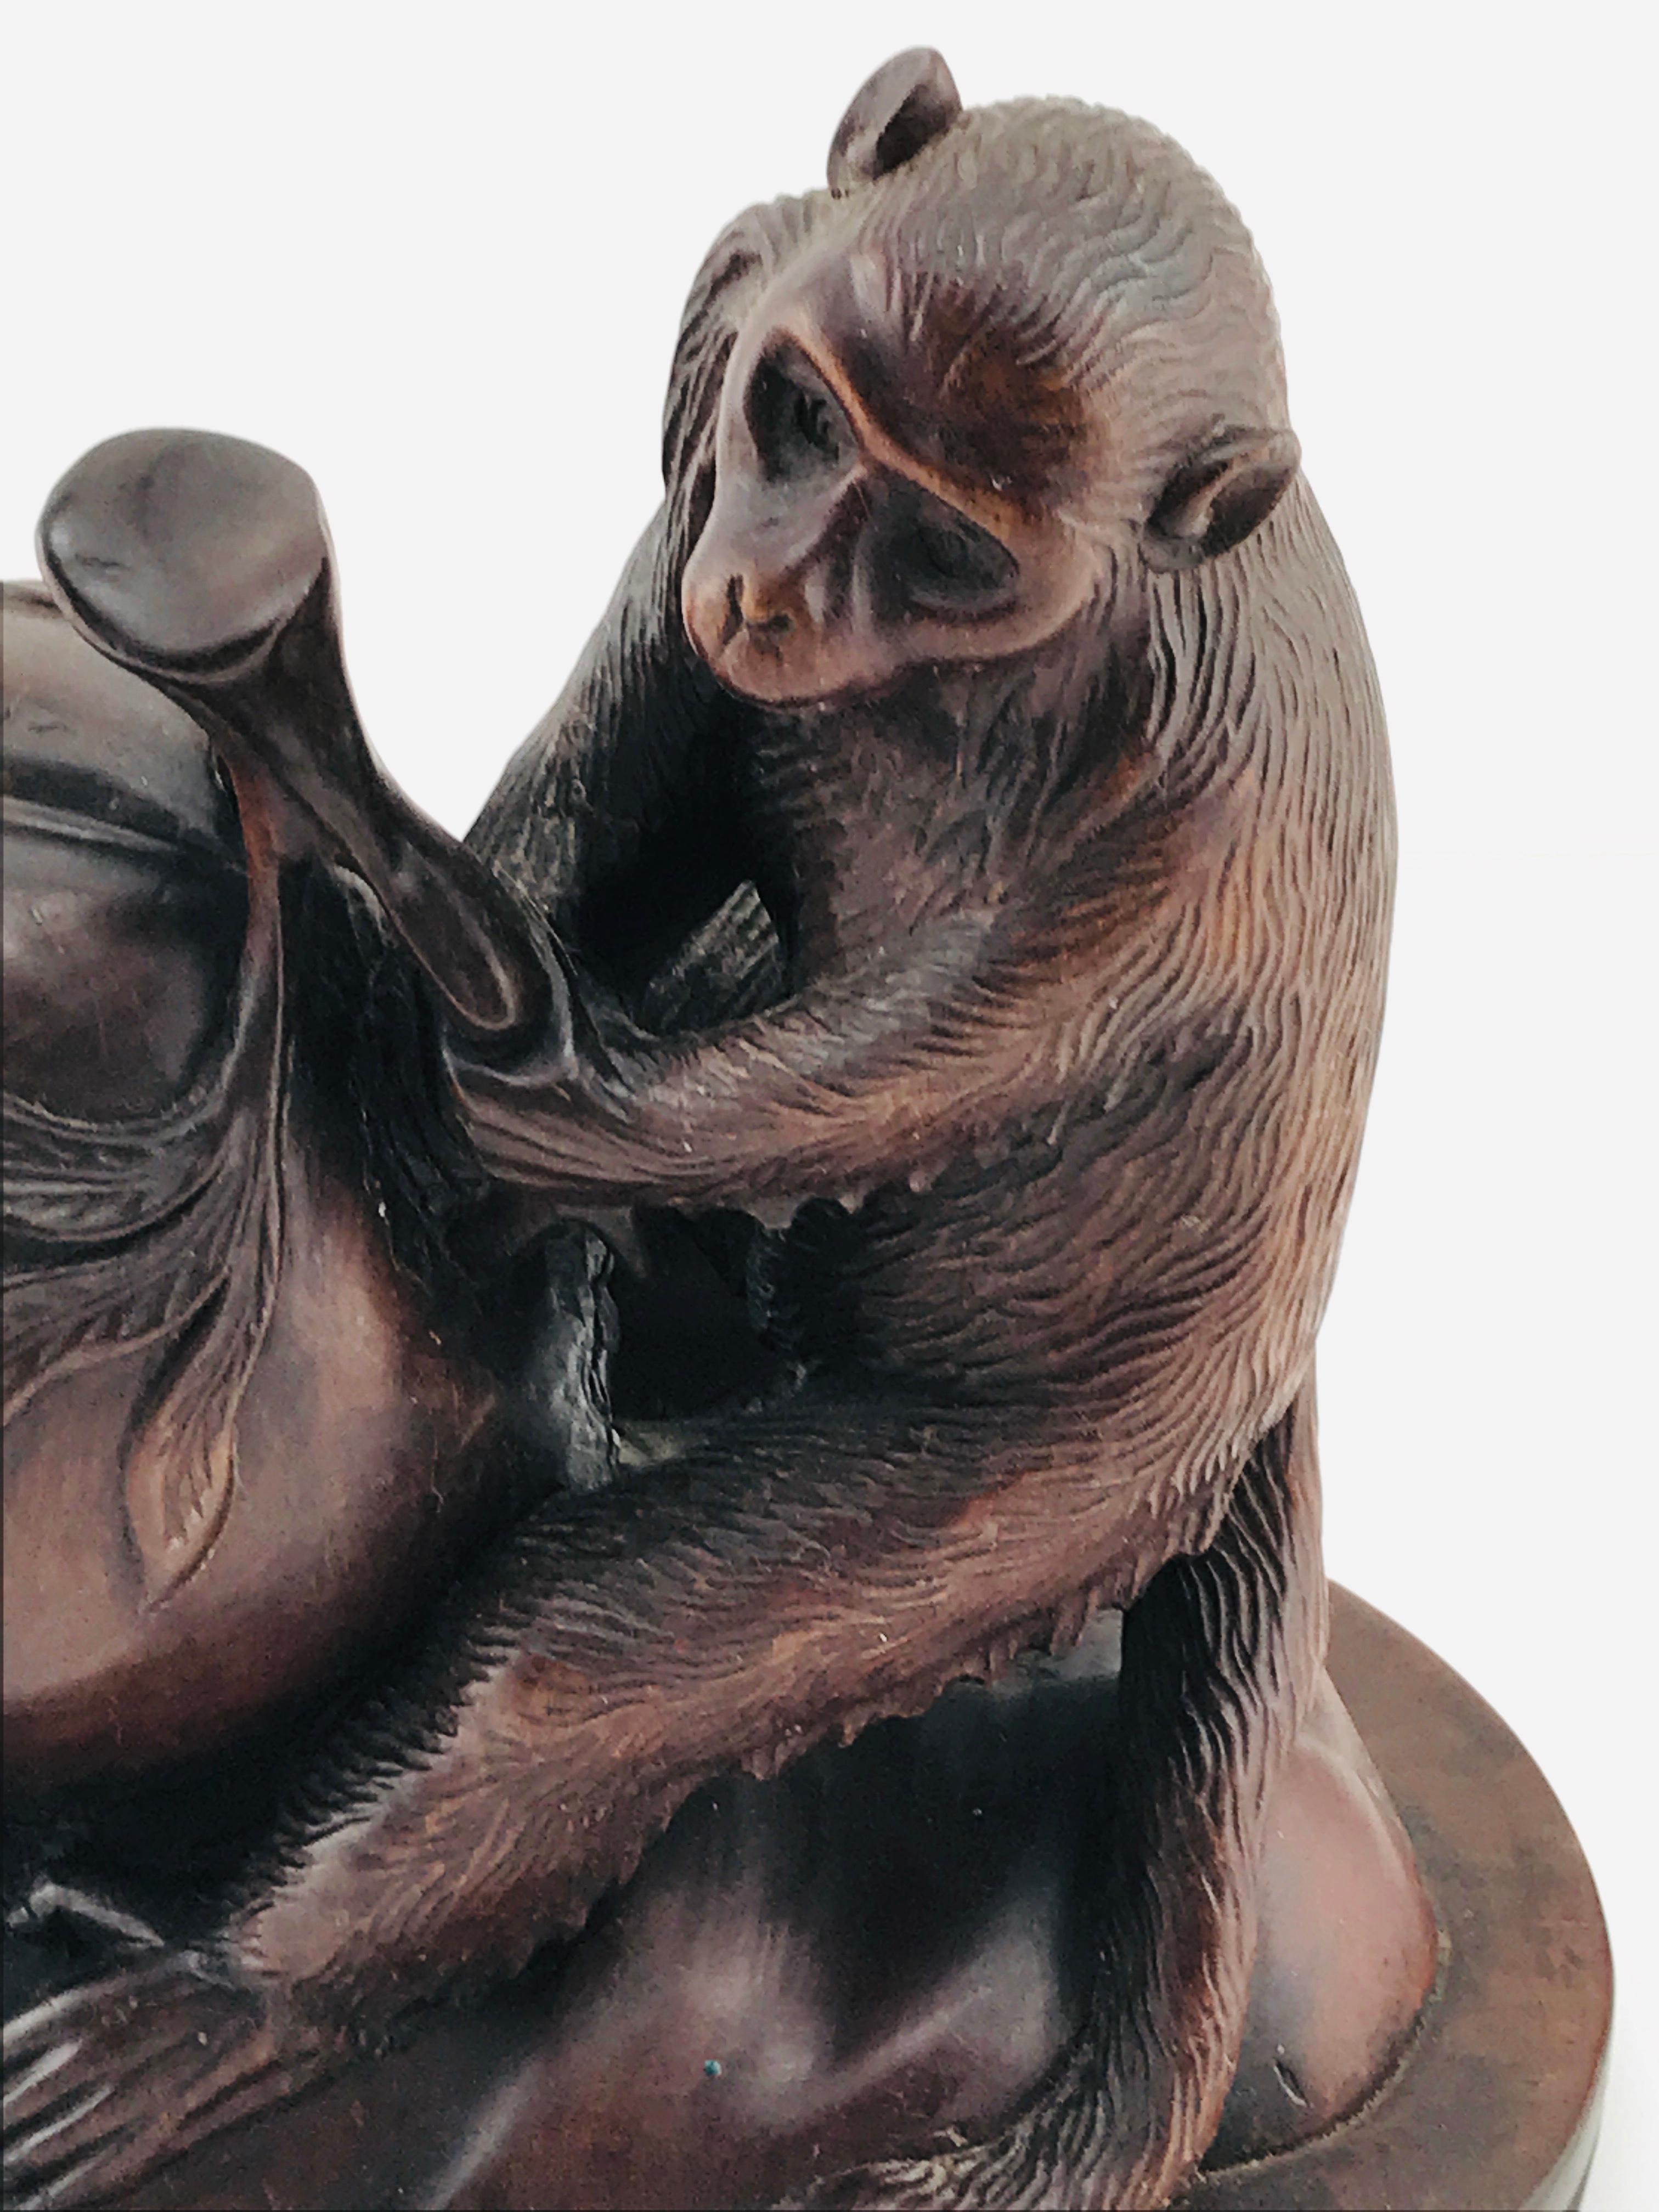 Spectacular sculpture of two monkeys in Italian walnut timber, circa 1960s.
Good condition.